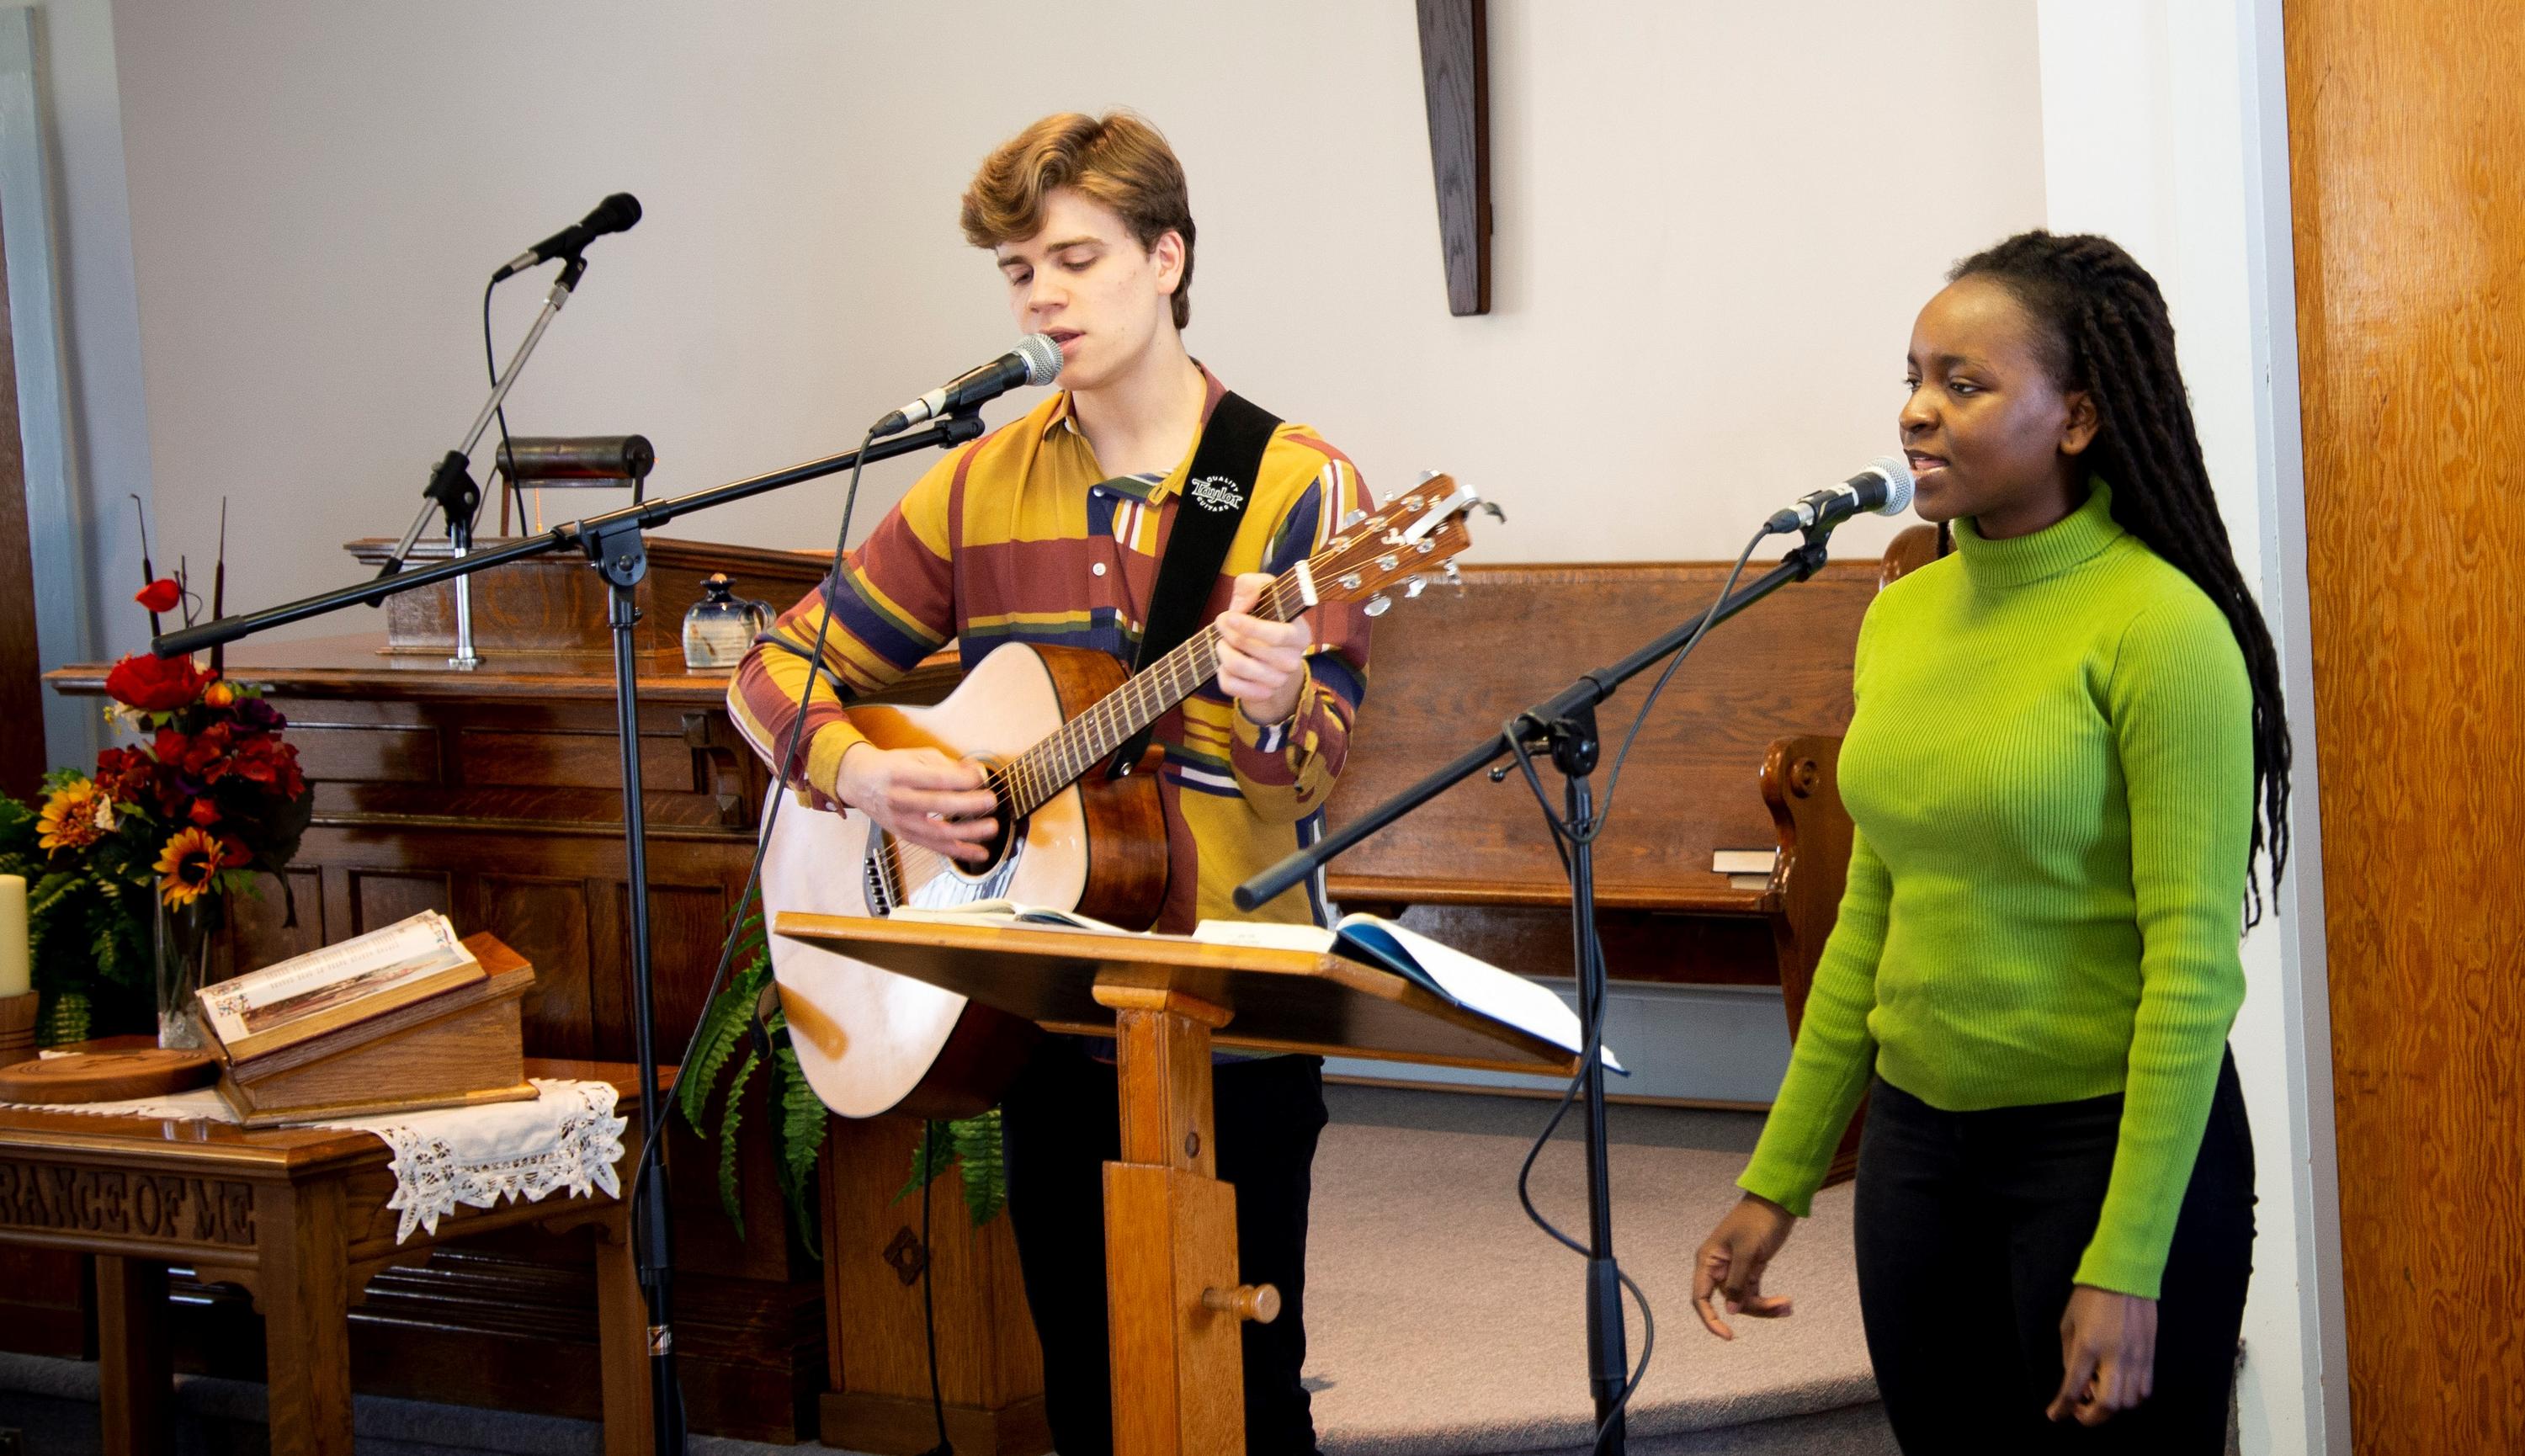 Students leading a worship service